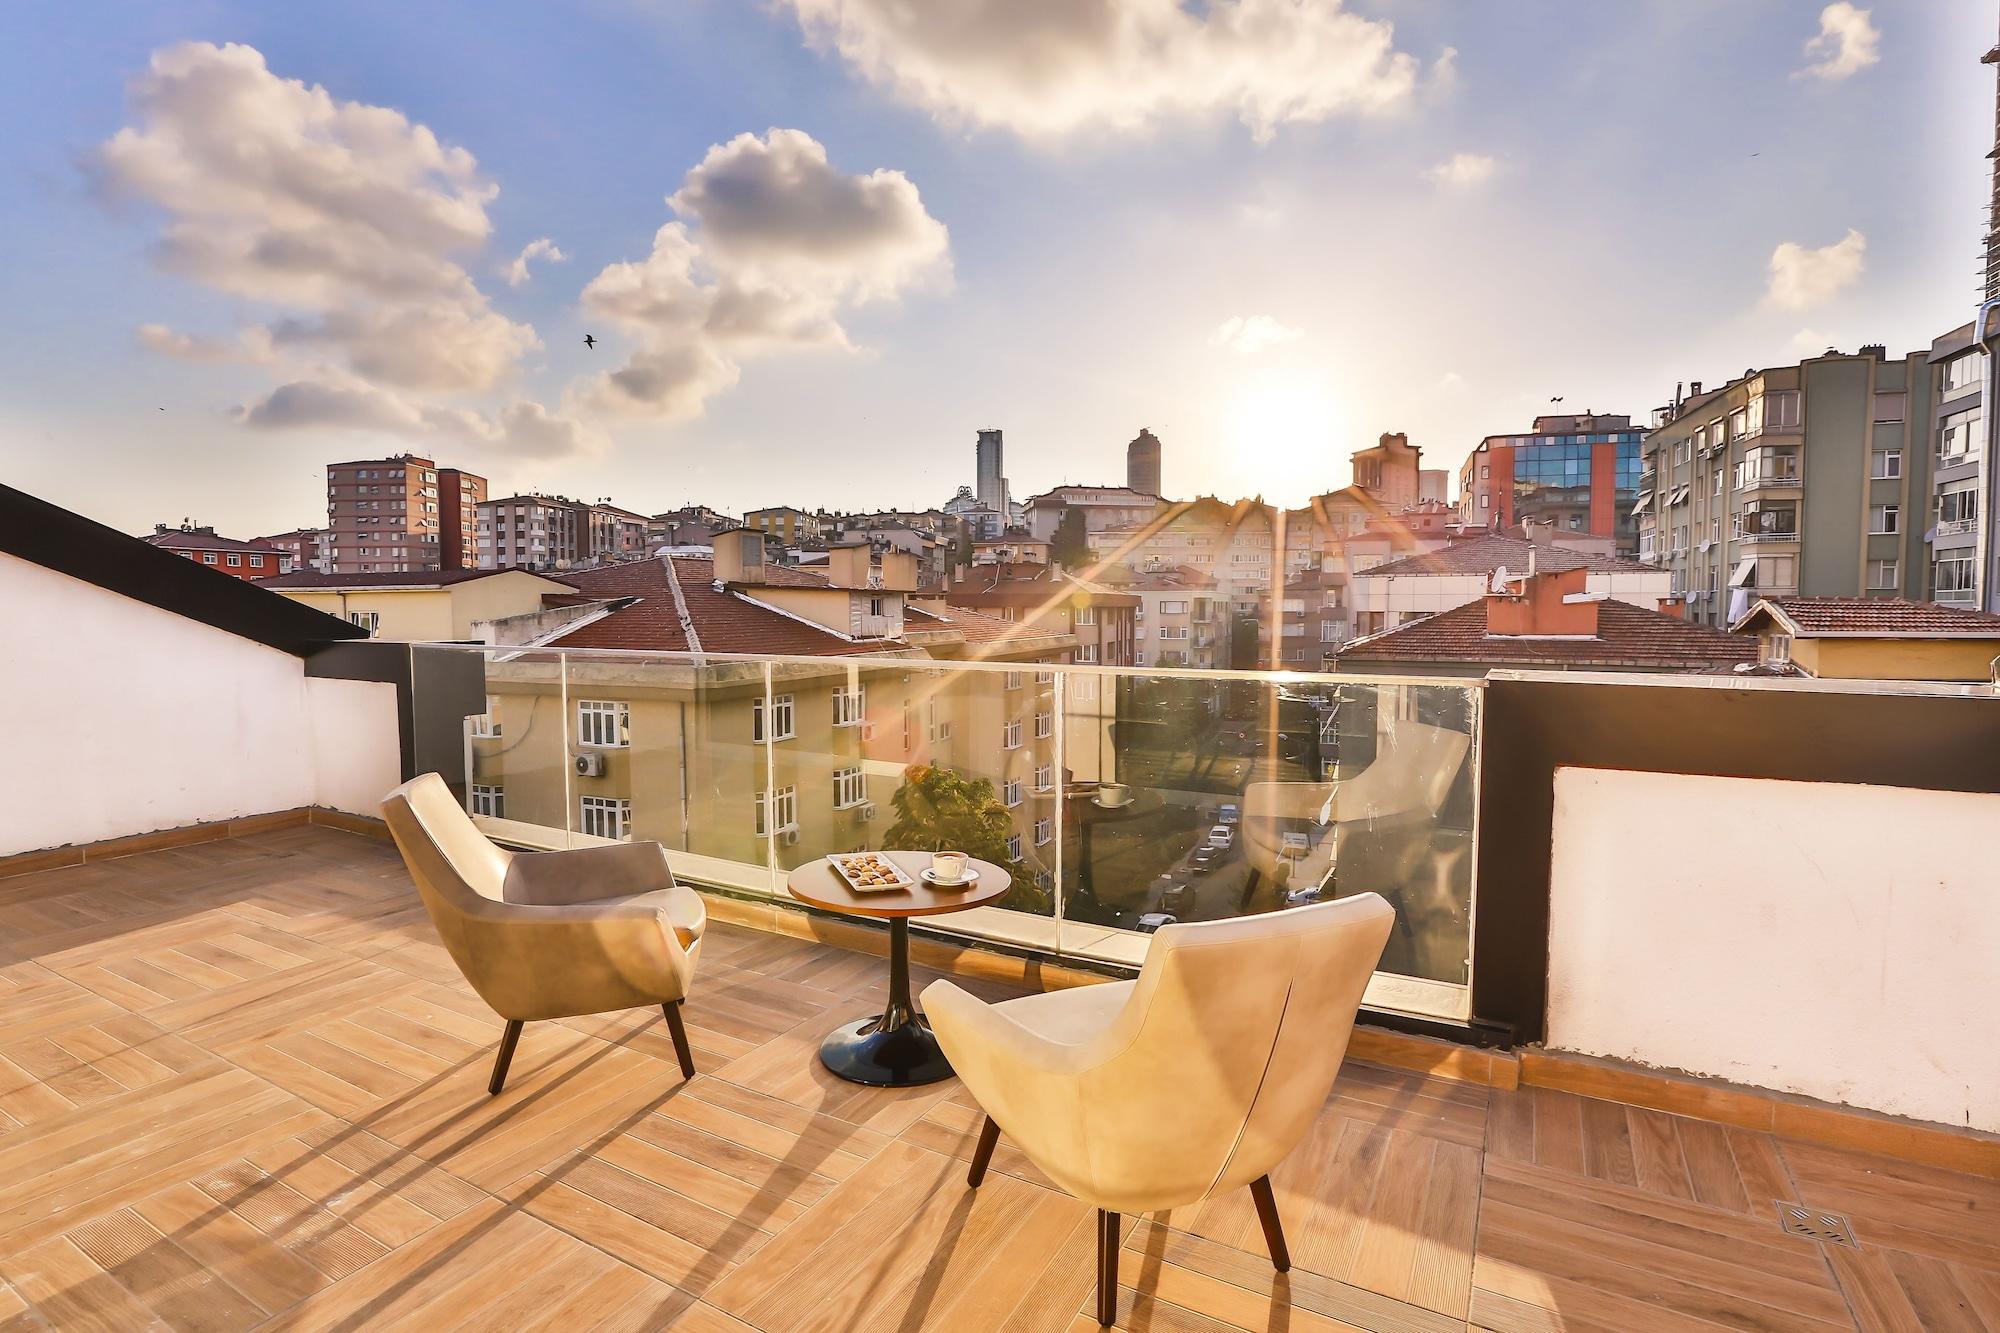 Business Life Boutique Hotel & Spa Istanbul Exterior foto